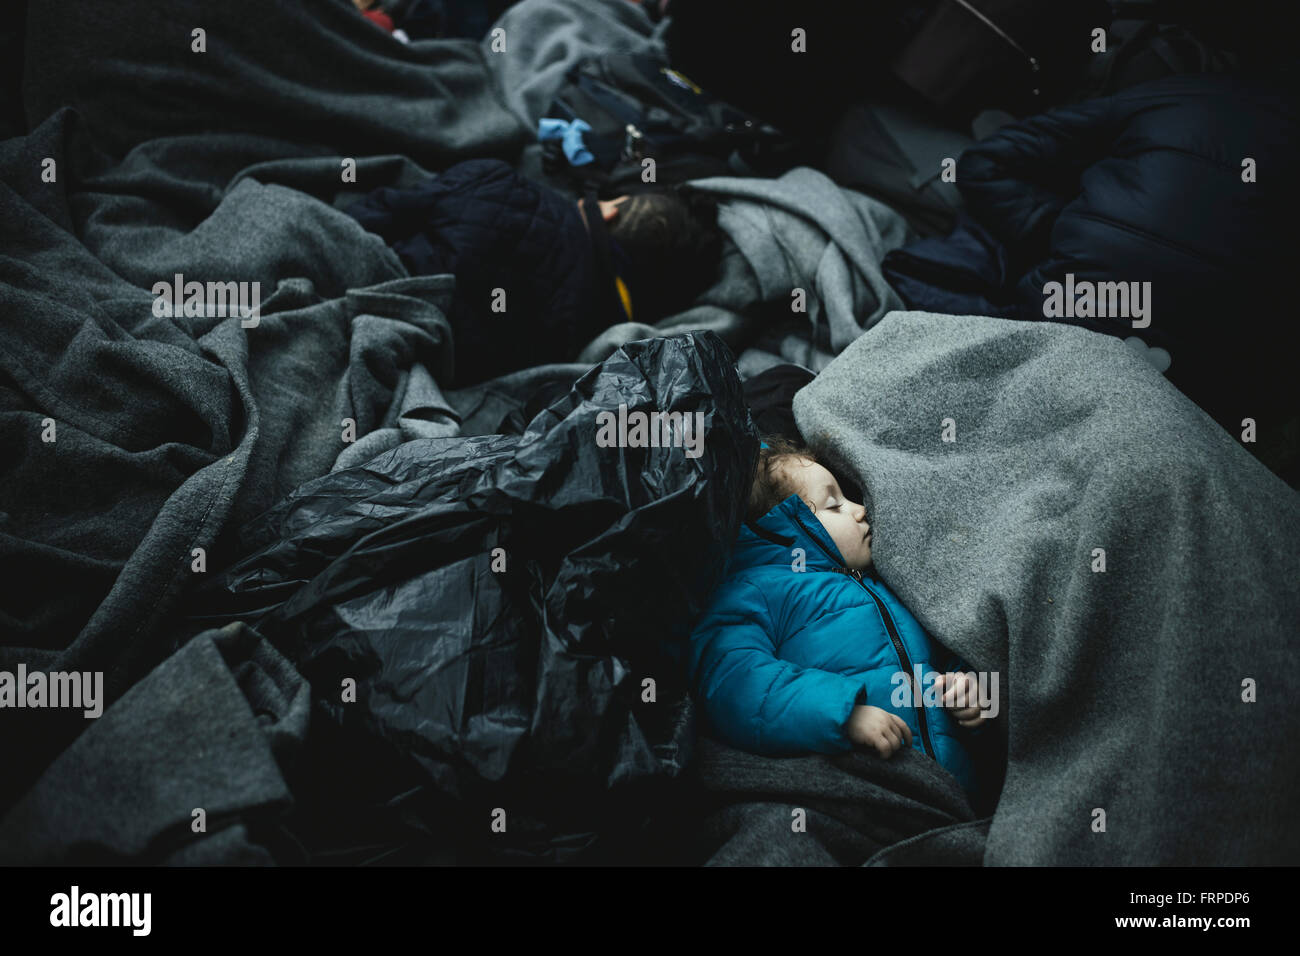 Idomeni refugee camp on Greek Macedonia border, waiting refugees at the checkpoint, a small child sleeps wrapped up in blankets Stock Photo